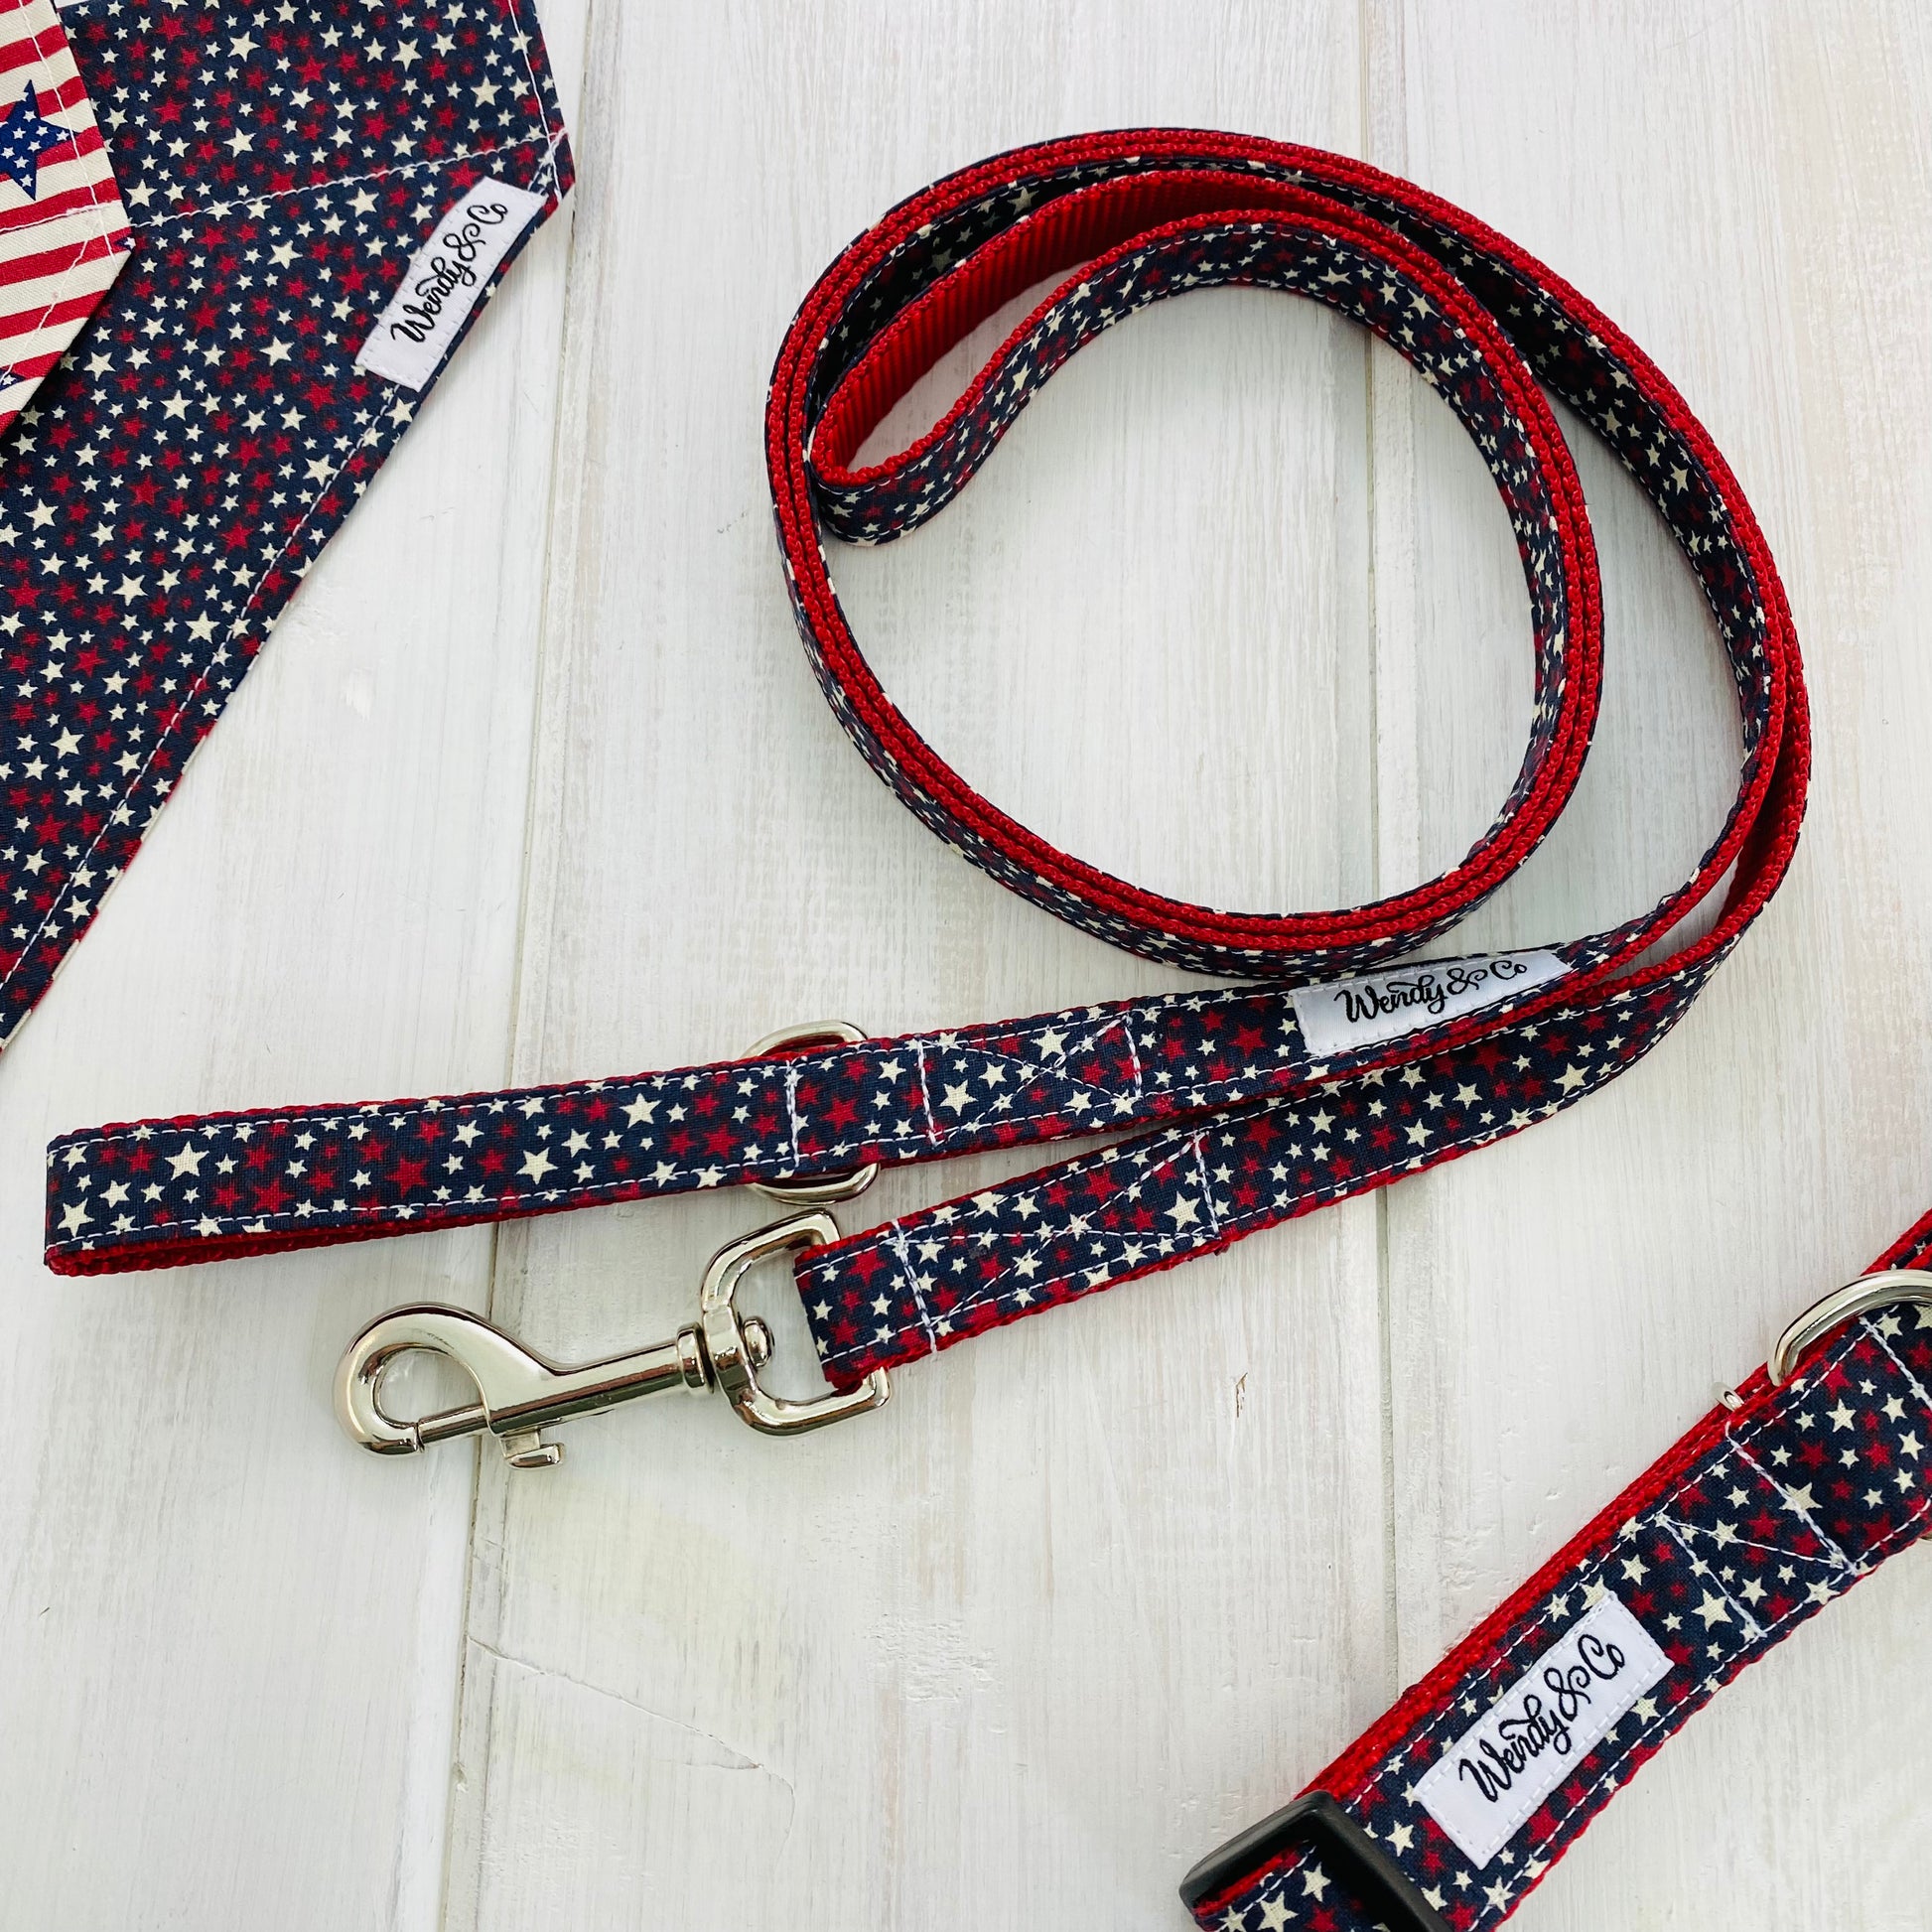 Dog leash in navy background with white and red stars sewn onto red webbing. Shown with matching bandana.